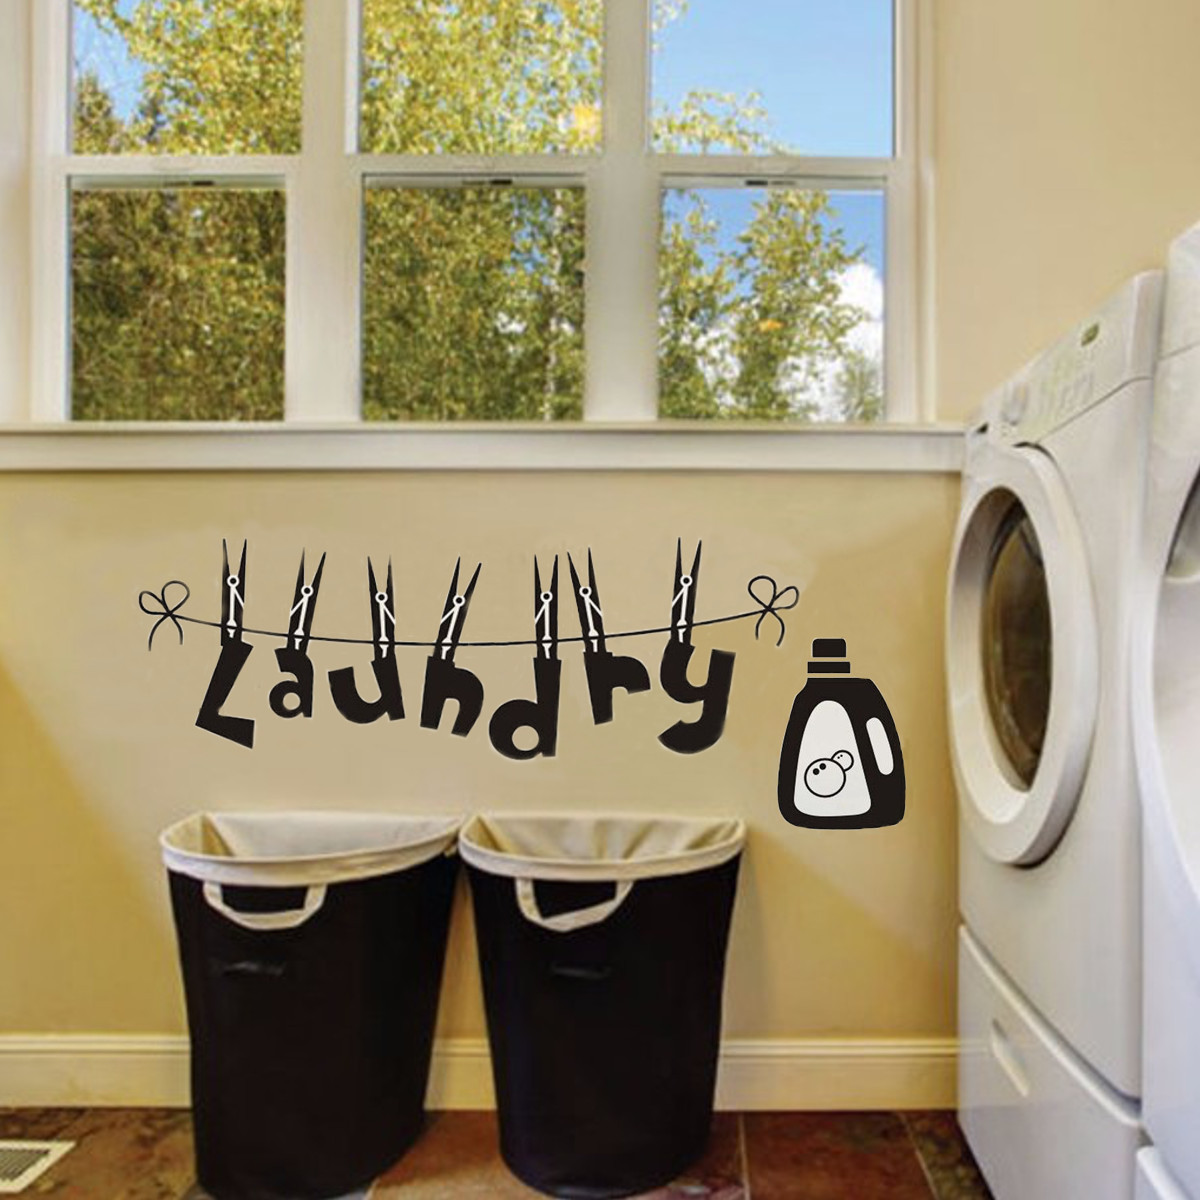 Laundry-Room-Wall-Sticker-PVC-Waterproof-Removable-Wall-Sticker-Painting-Home-Decor-1719040-5